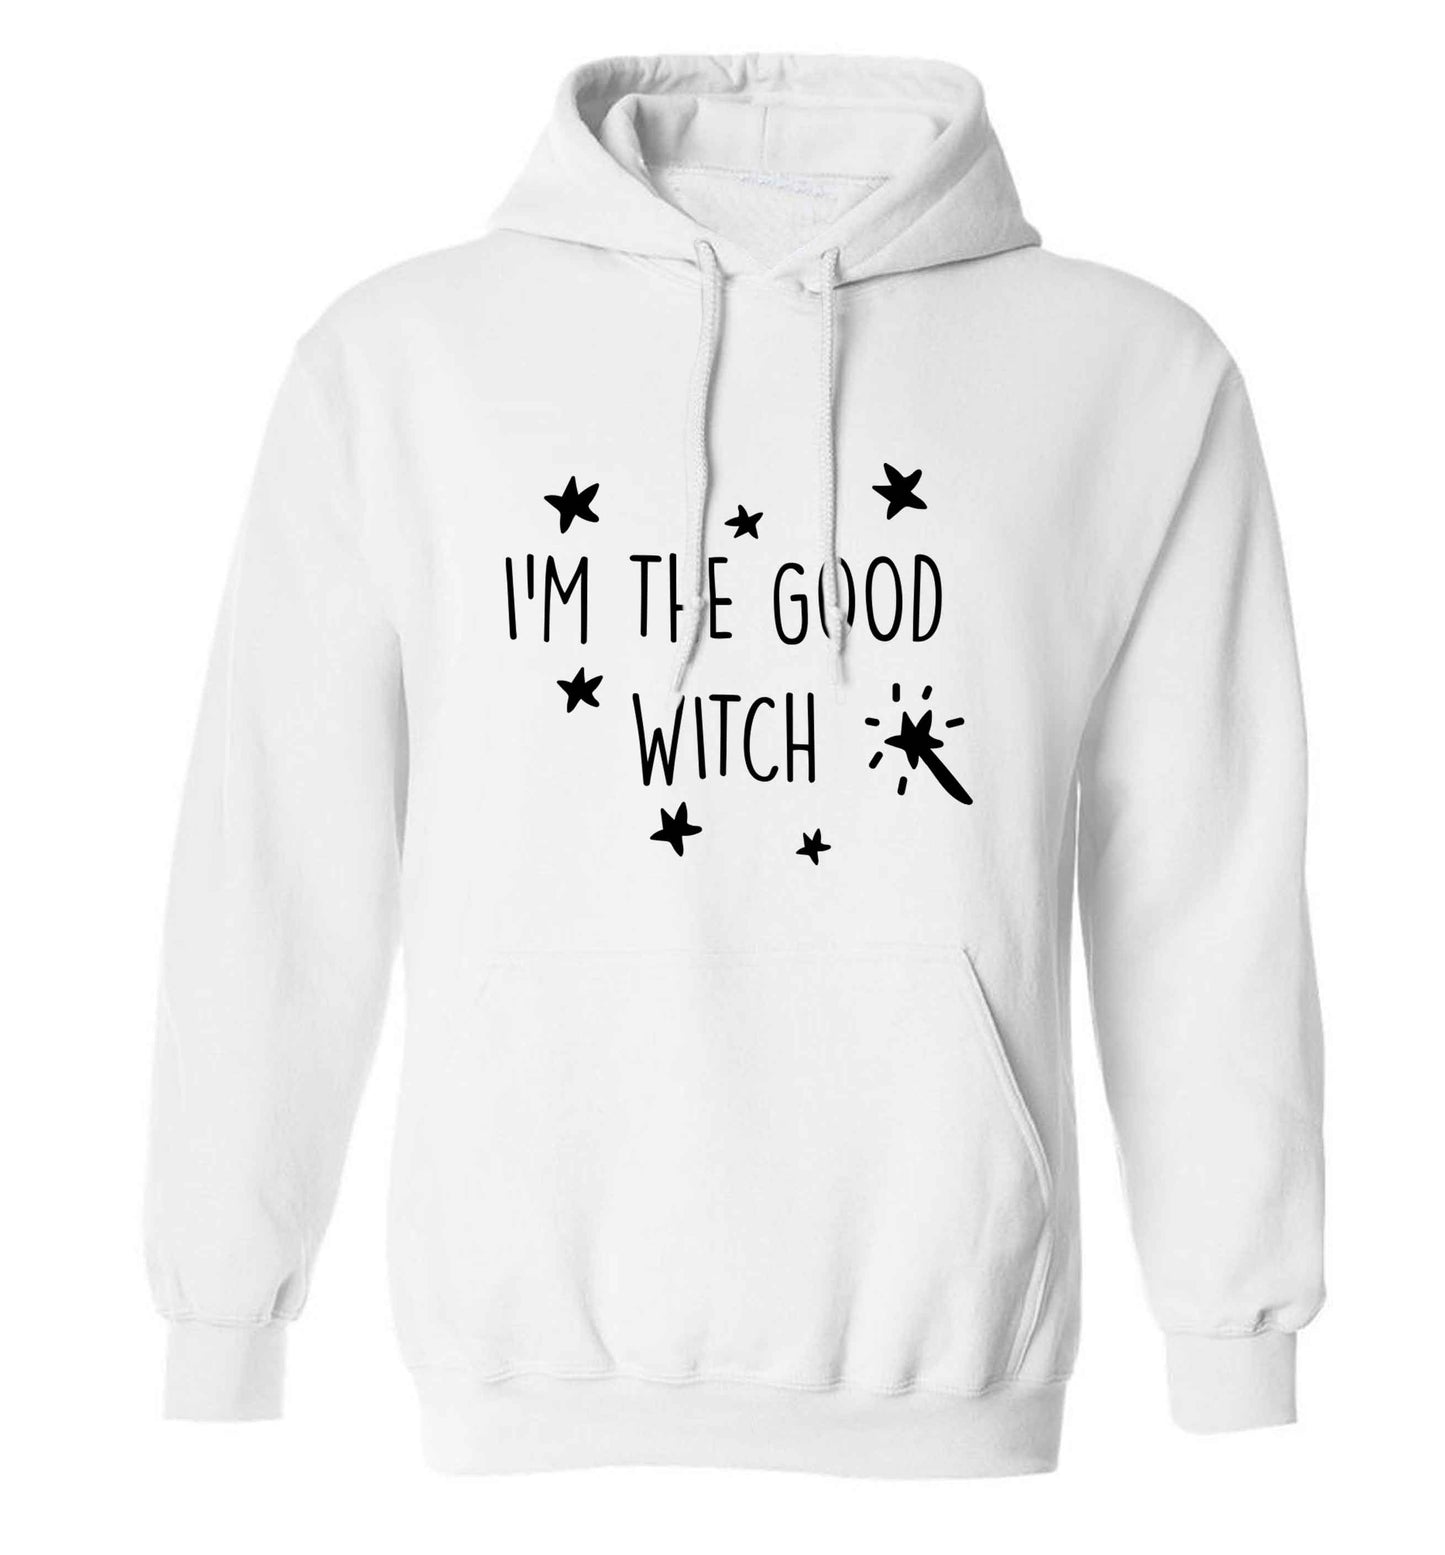 Good witch adults unisex white hoodie 2XL